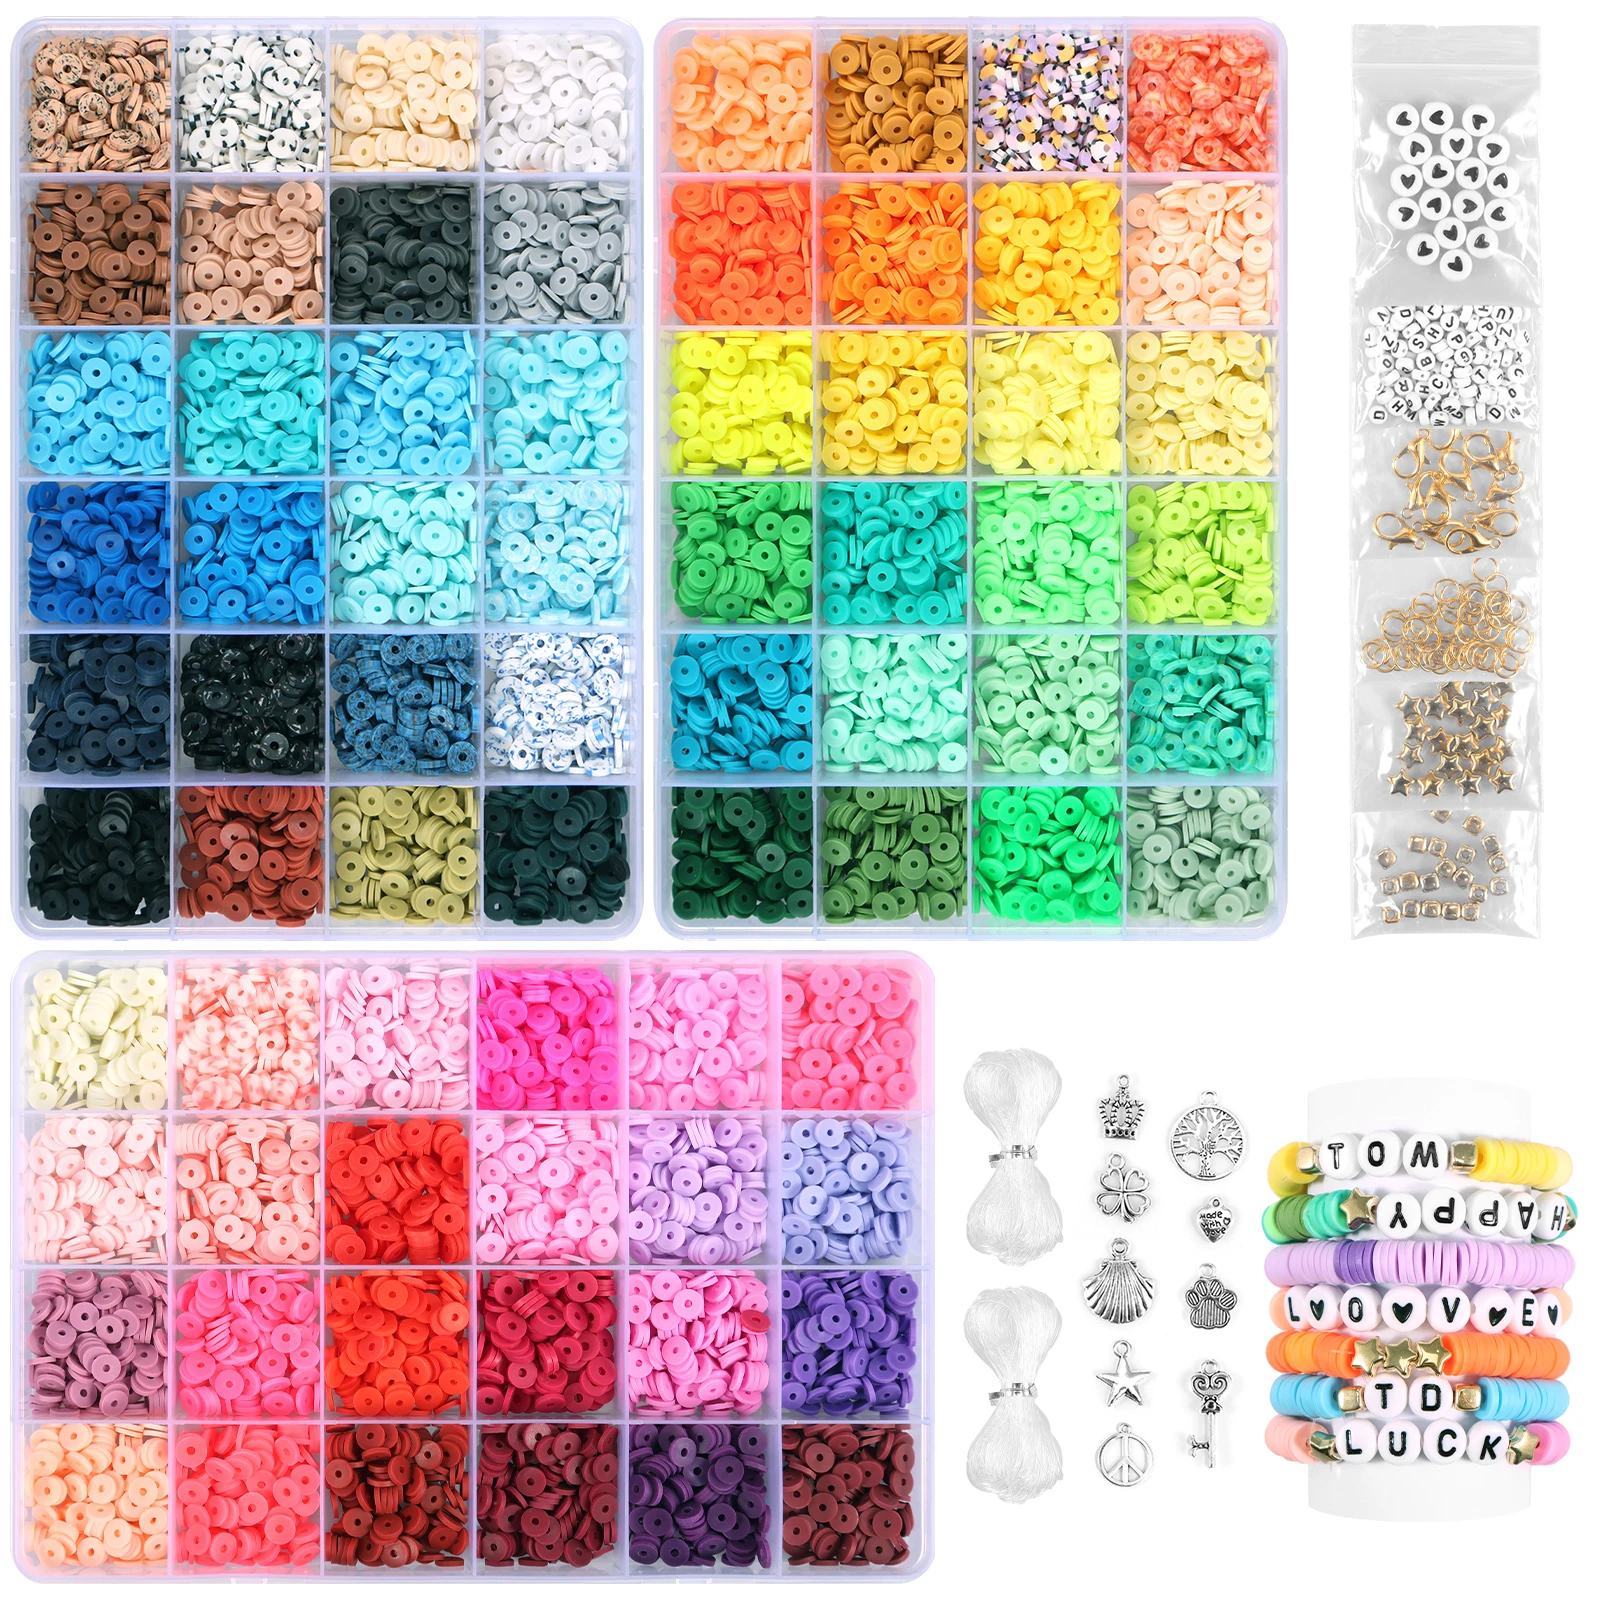 12579Pcs Clay Beads Bracelet Making Kit DIY Clay Beads Spacer Beads with  Letter Bead Elastic String for Jewelry Making Bracelet - AliExpress